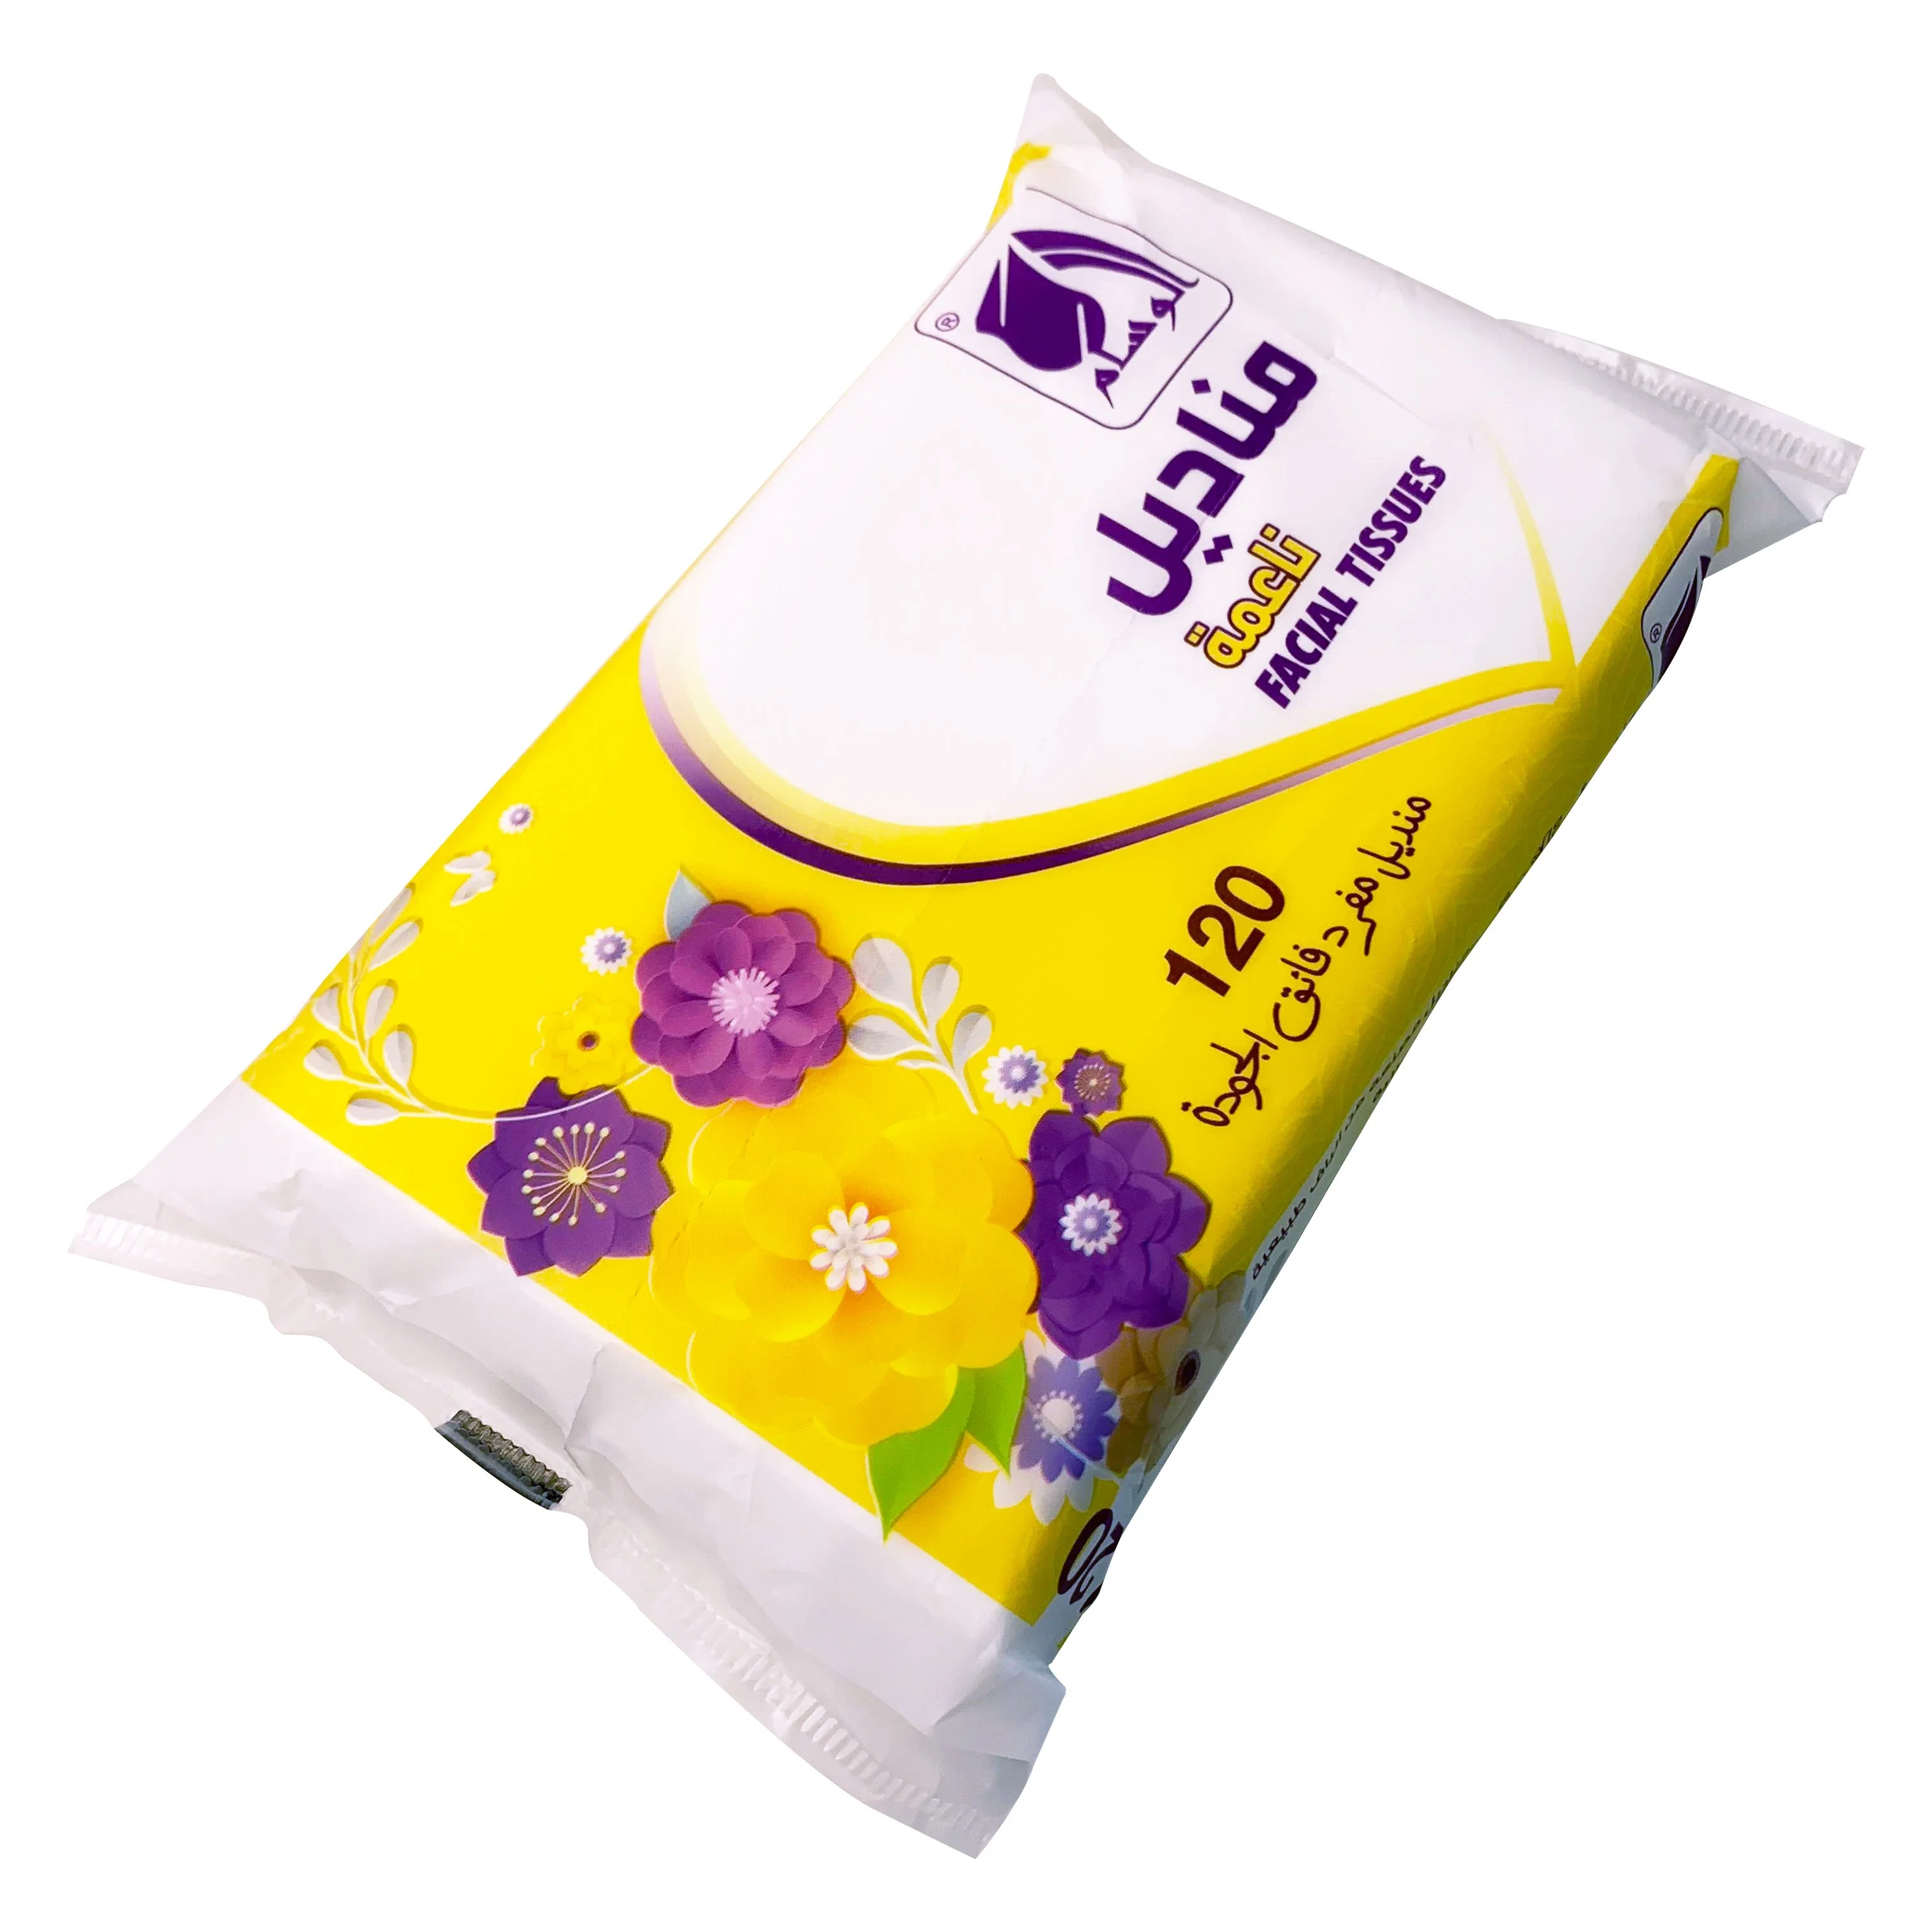 OEM Facial Tissue Paper Soft Pack Made by Facial Tissue Supplier, Soft Color Bag Facial Tissue Paper